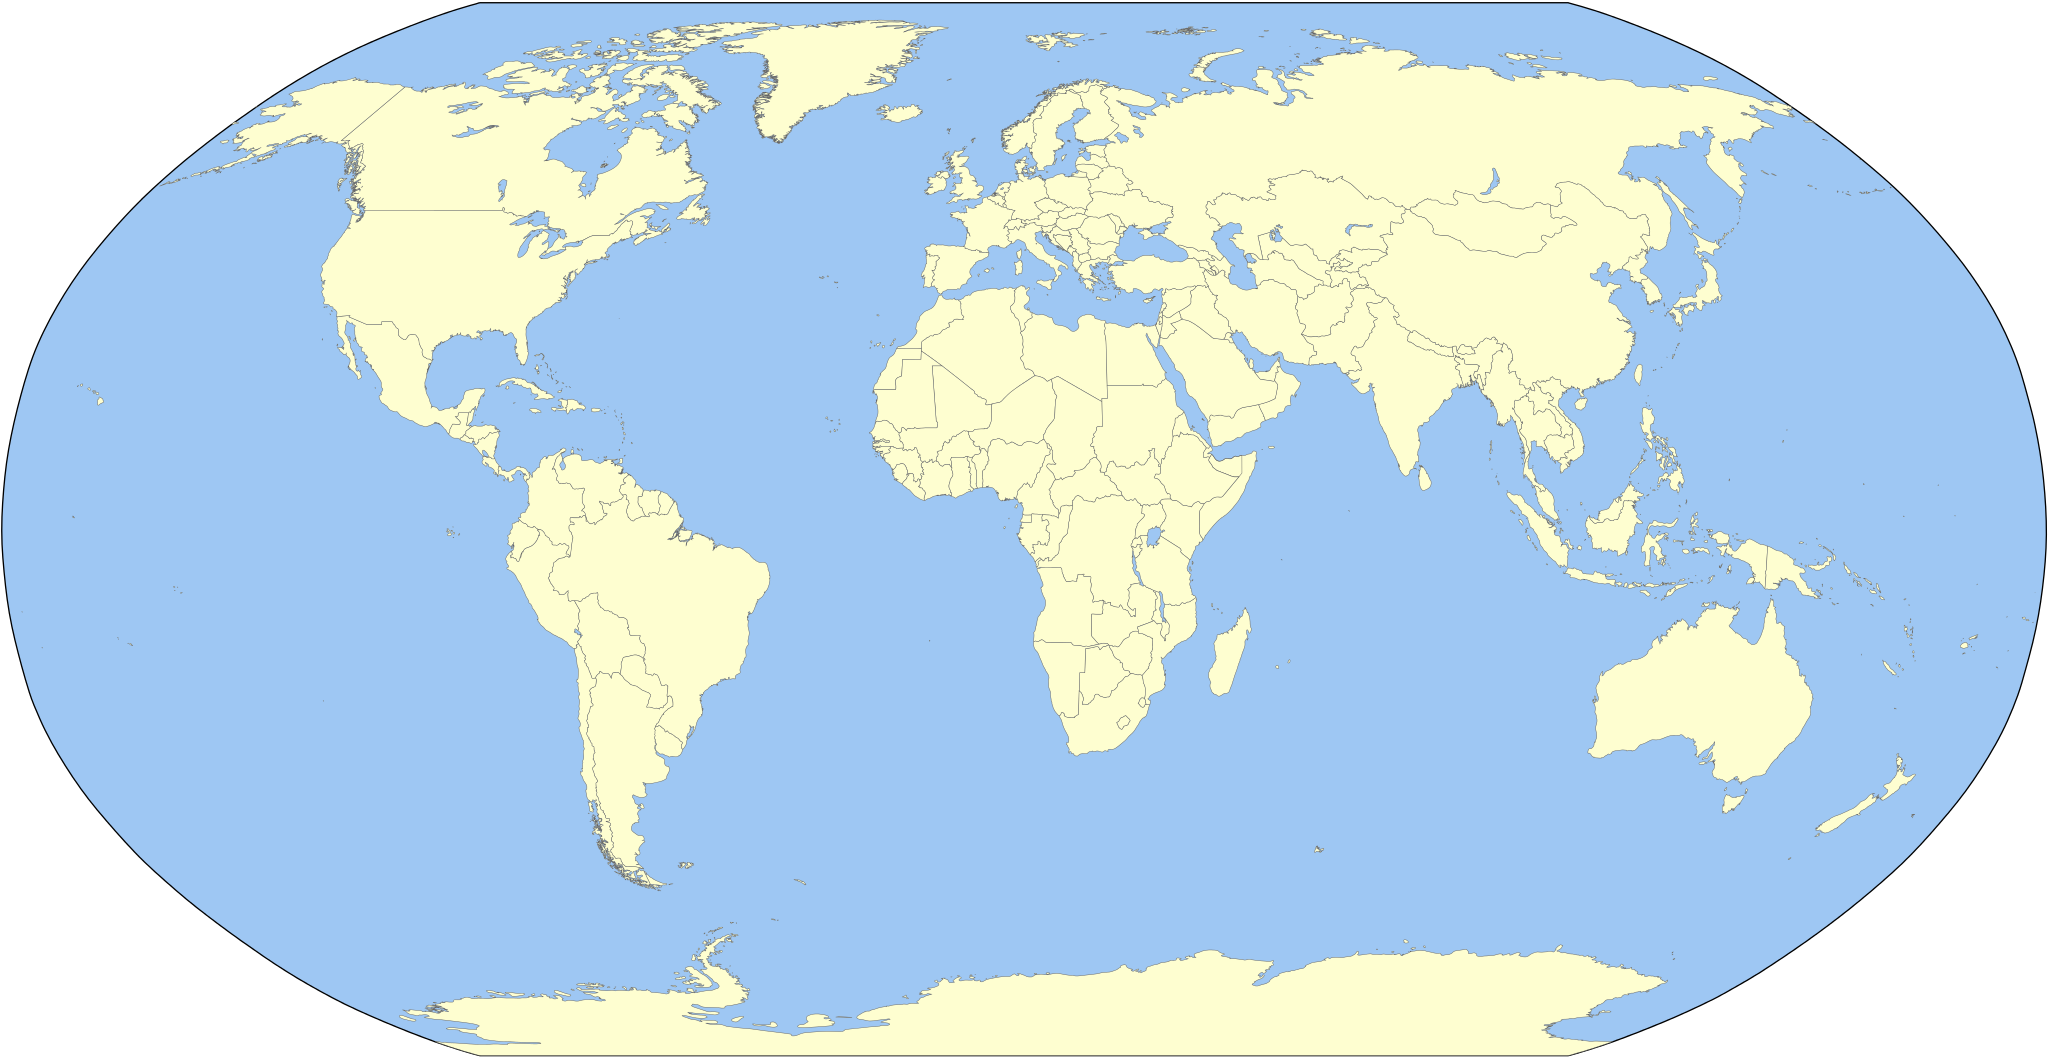 File:World map.png.